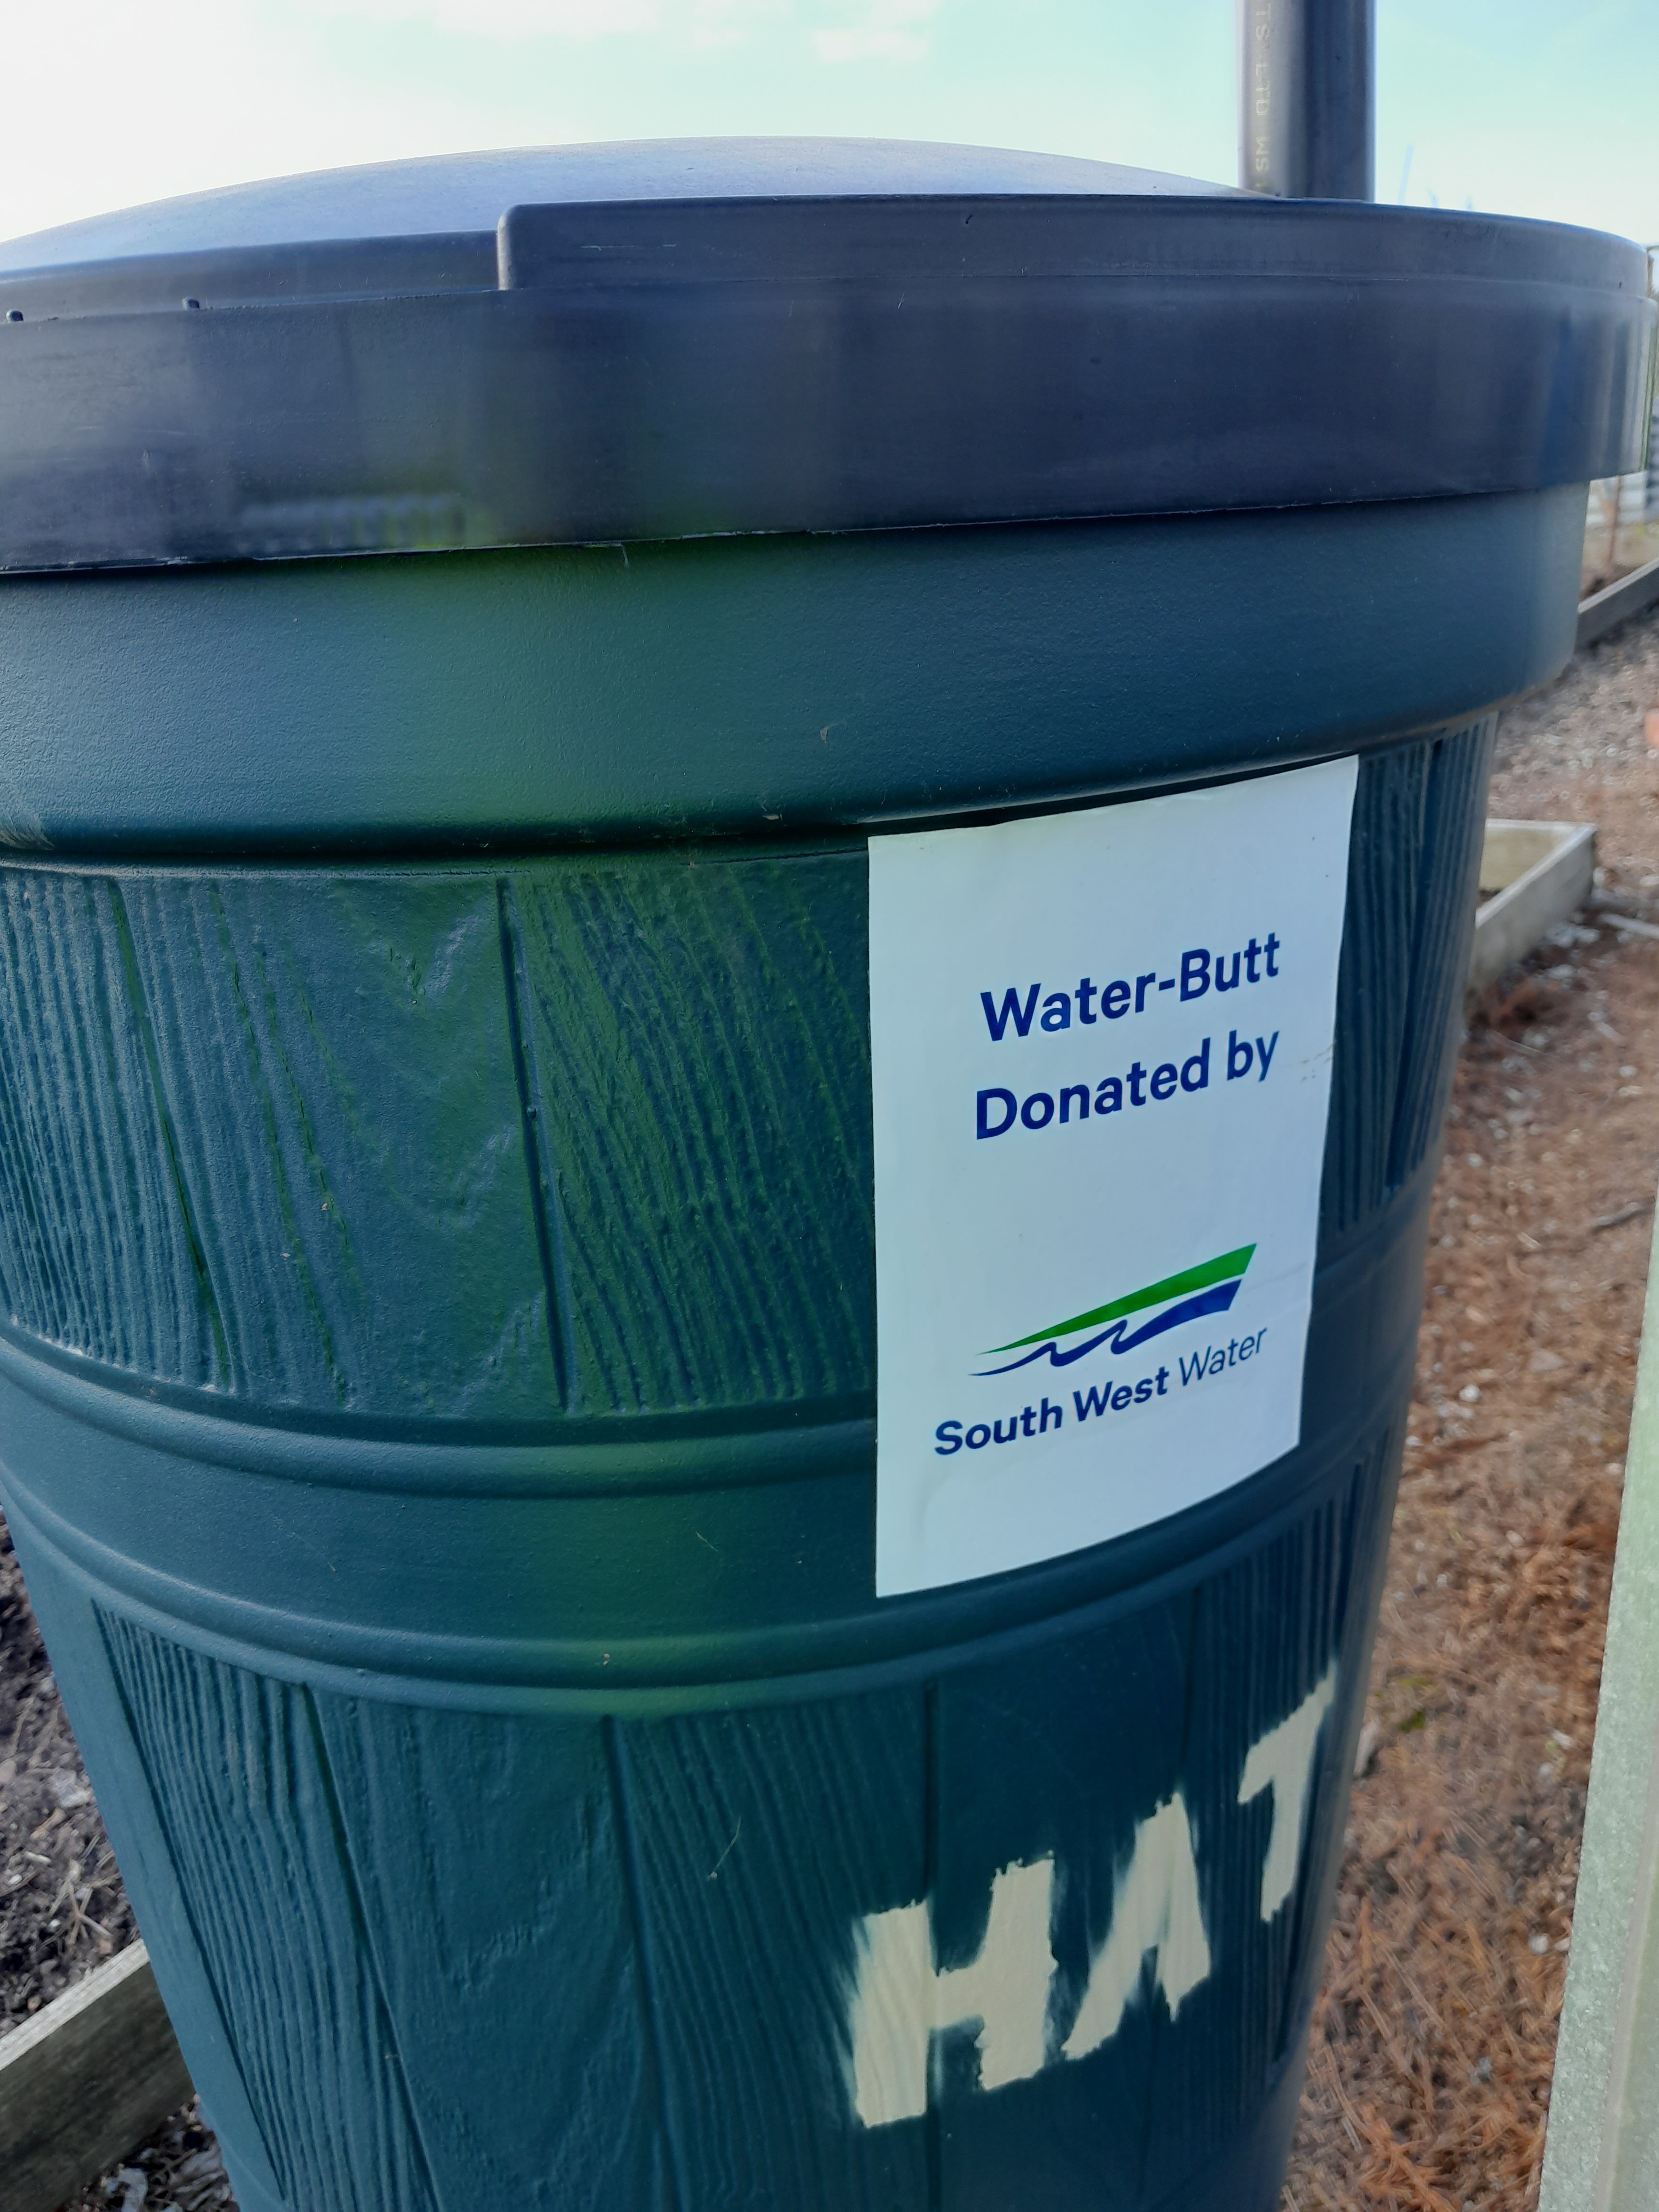 Water Butt donated by South West Water